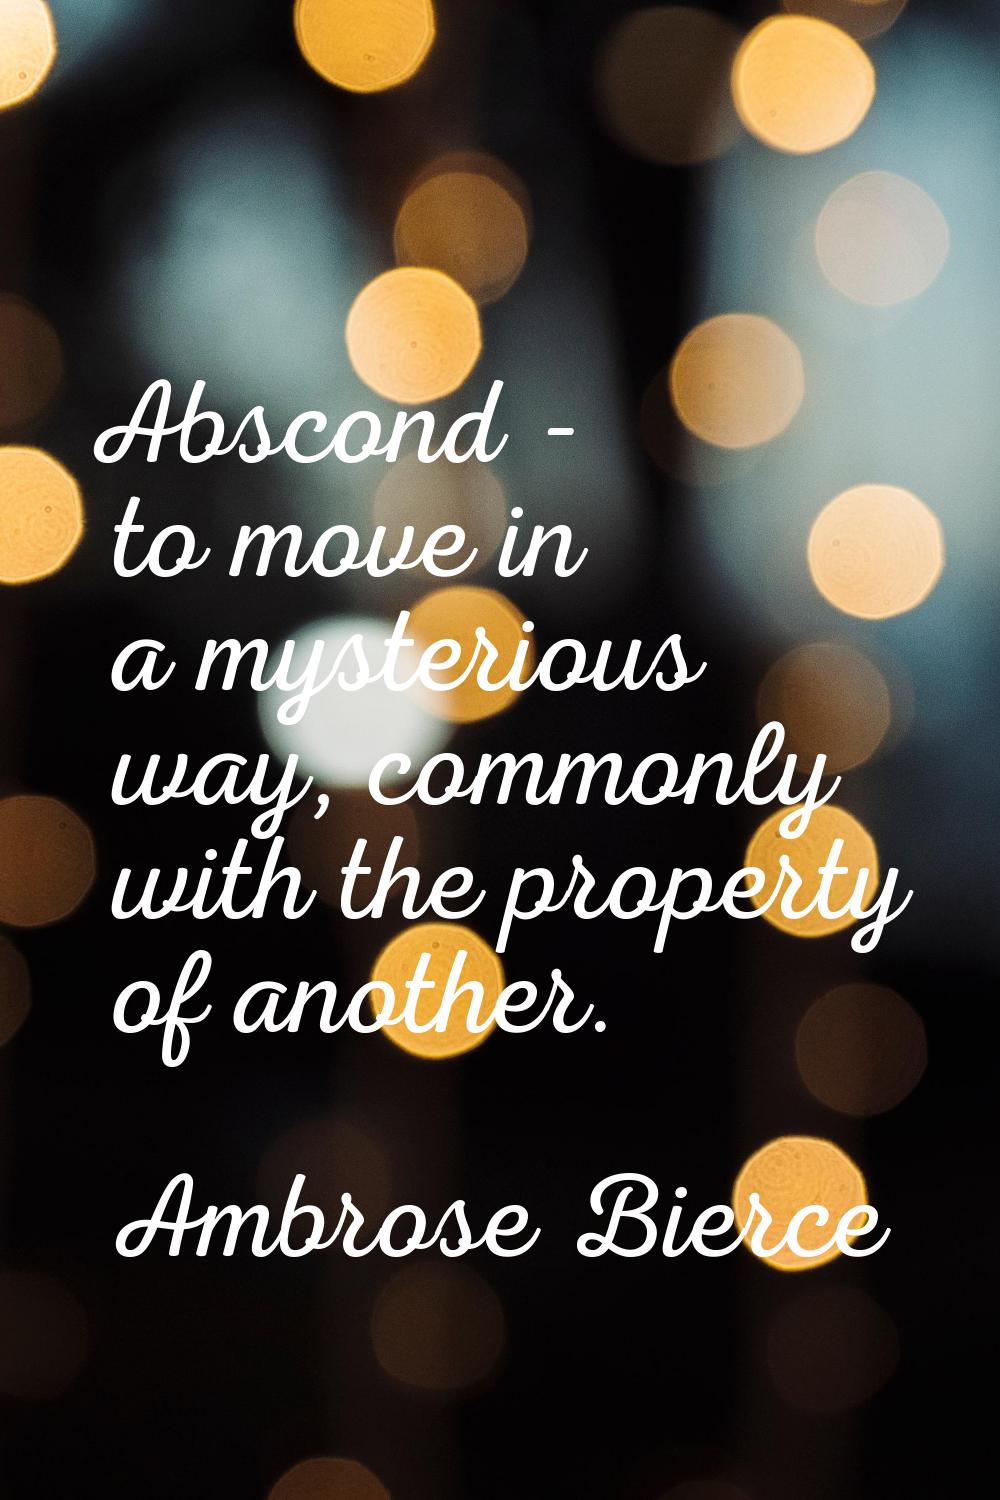 Abscond - to move in a mysterious way, commonly with the property of another.